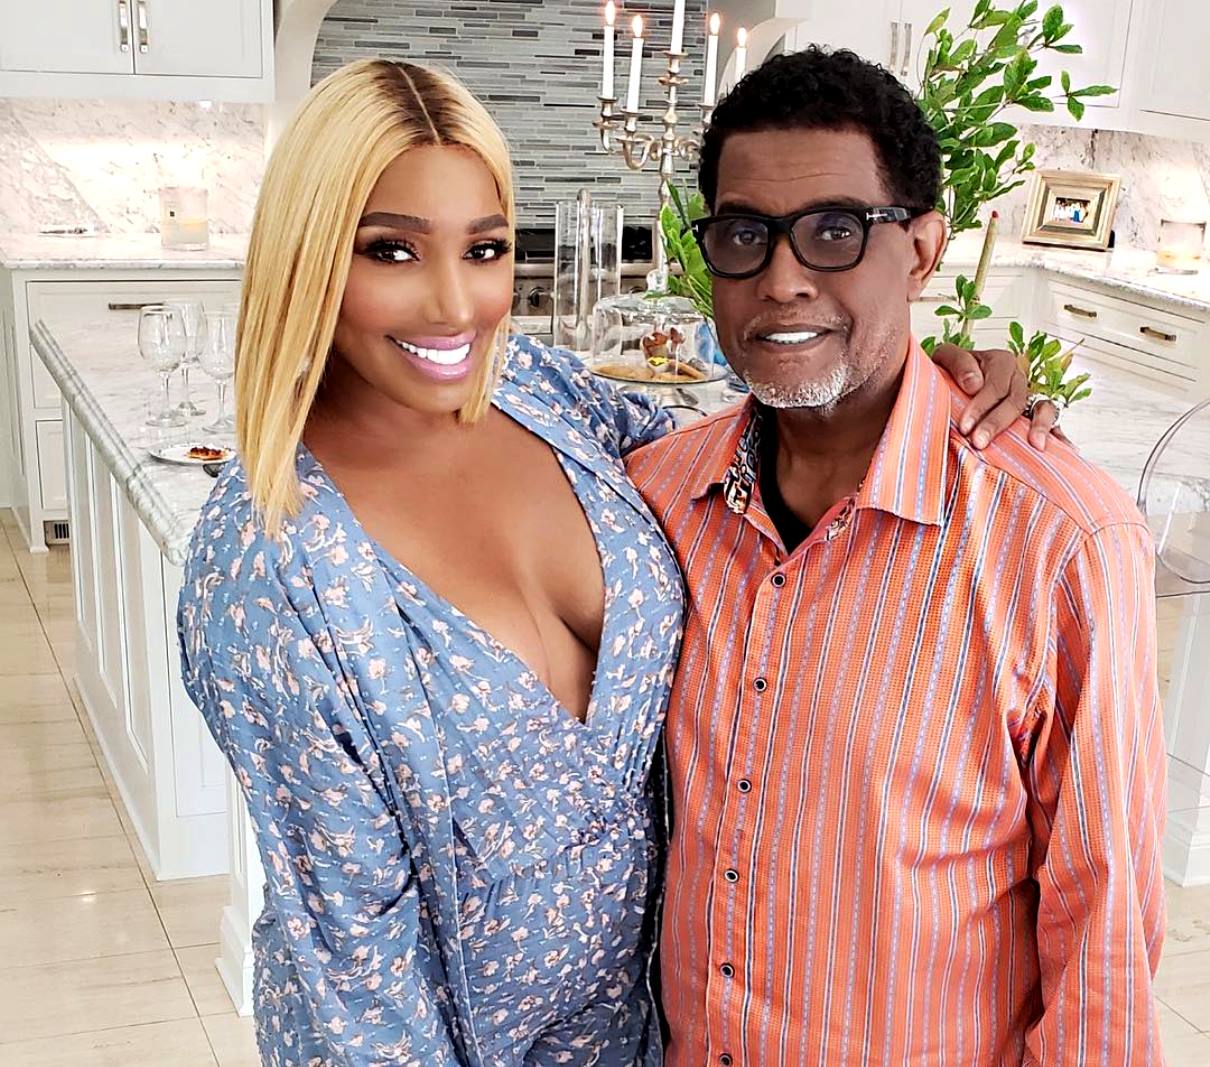 NeNe Leakes Celebrates Gregg Leakes' Birthday - Check Out The Post She Shared In His Honor